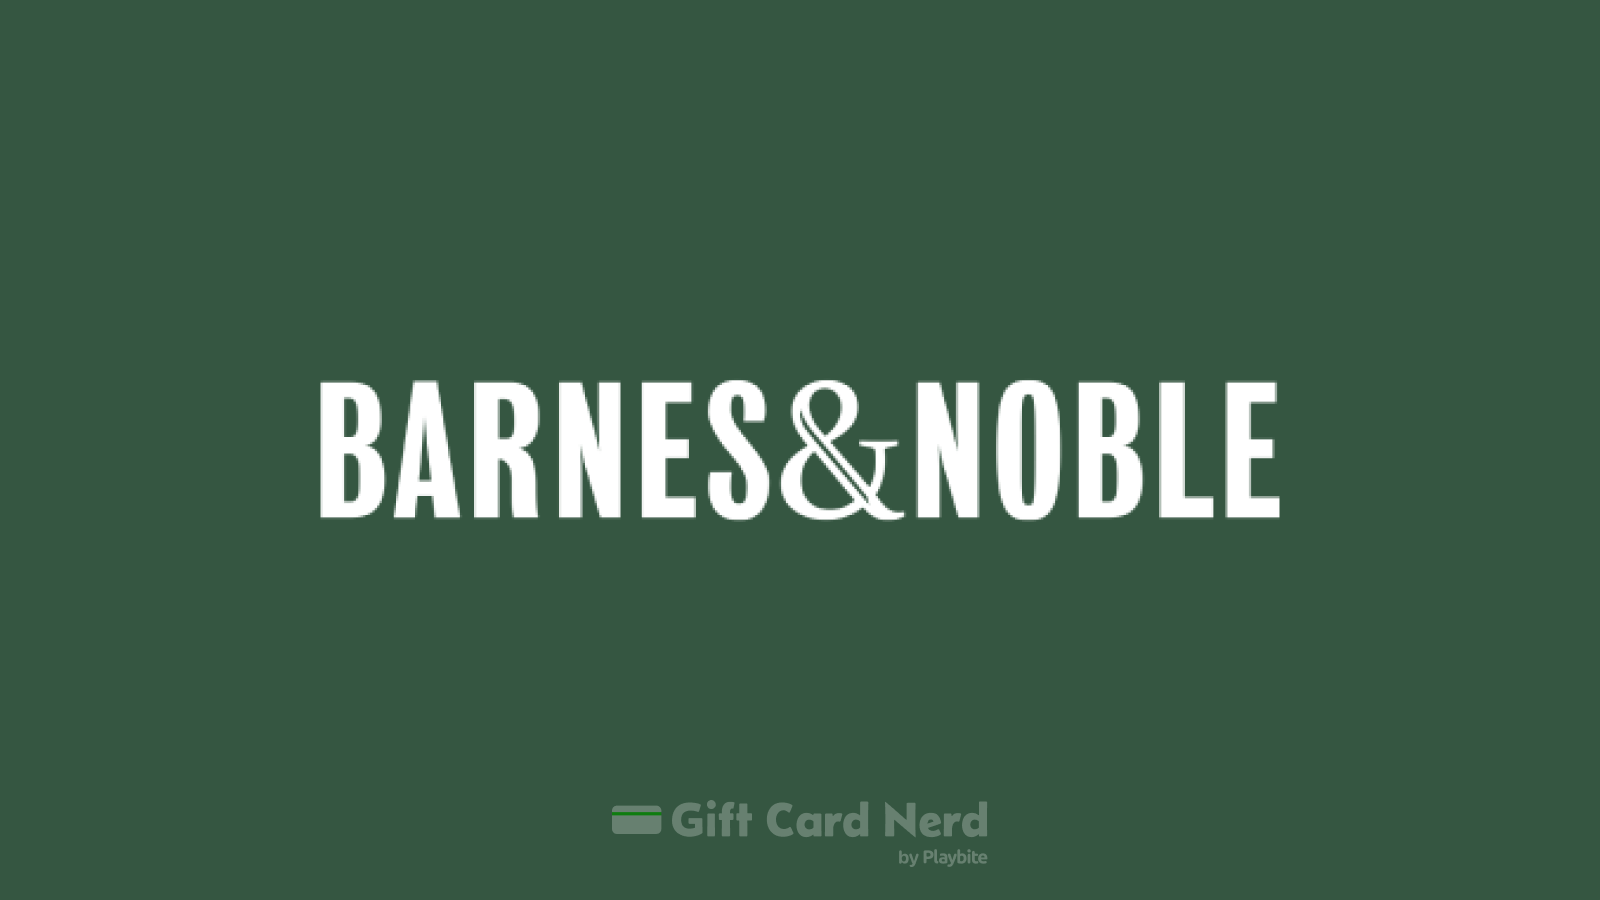 Does Game Stop Sell Barnes and Noble Gift Cards?